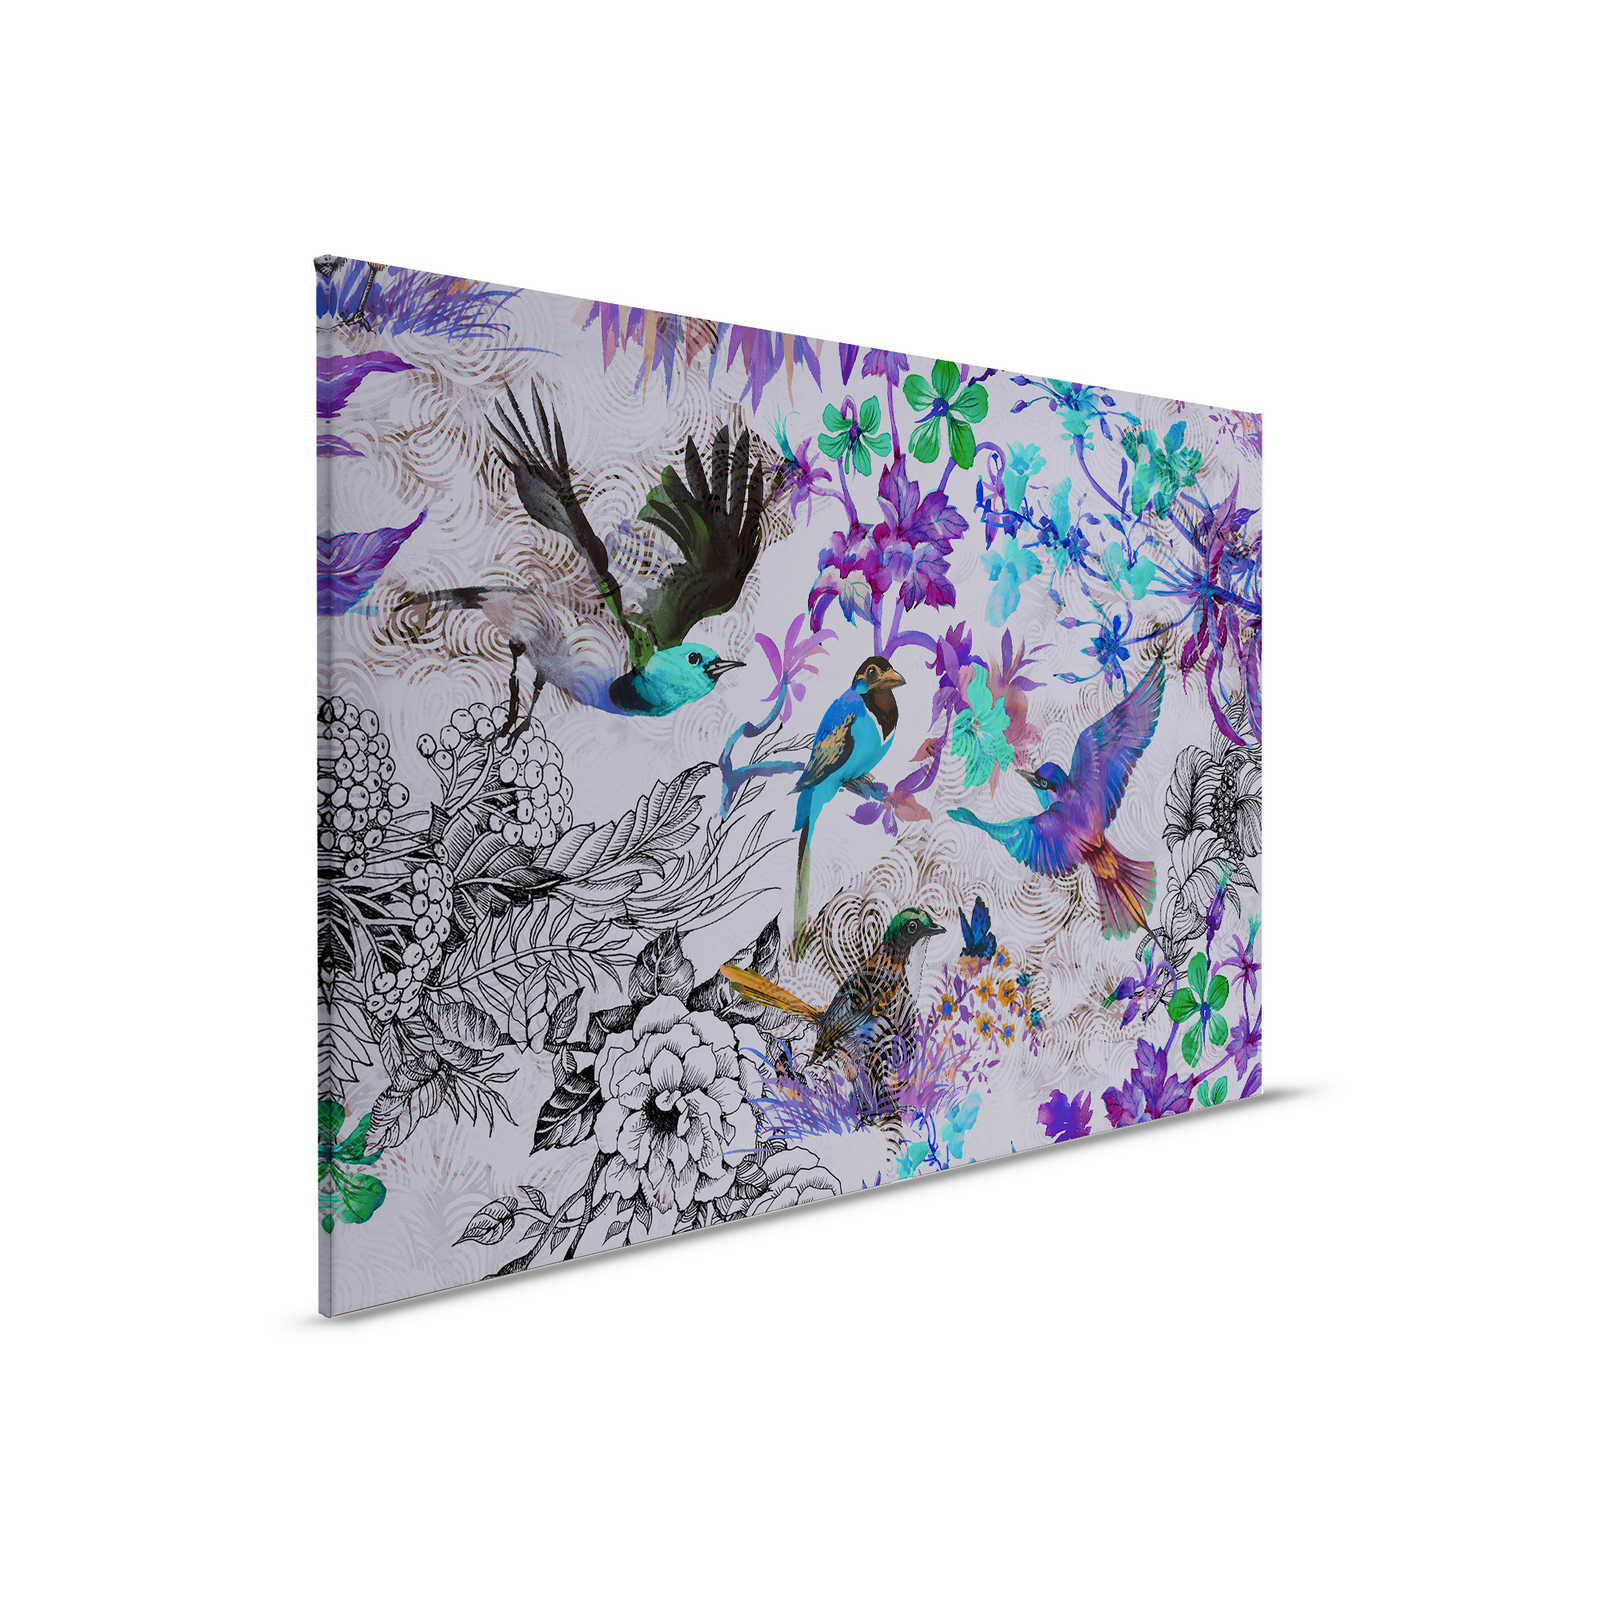         Purple Canvas Painting with Flowers & Birds - 0.90 m x 0.60 m
    